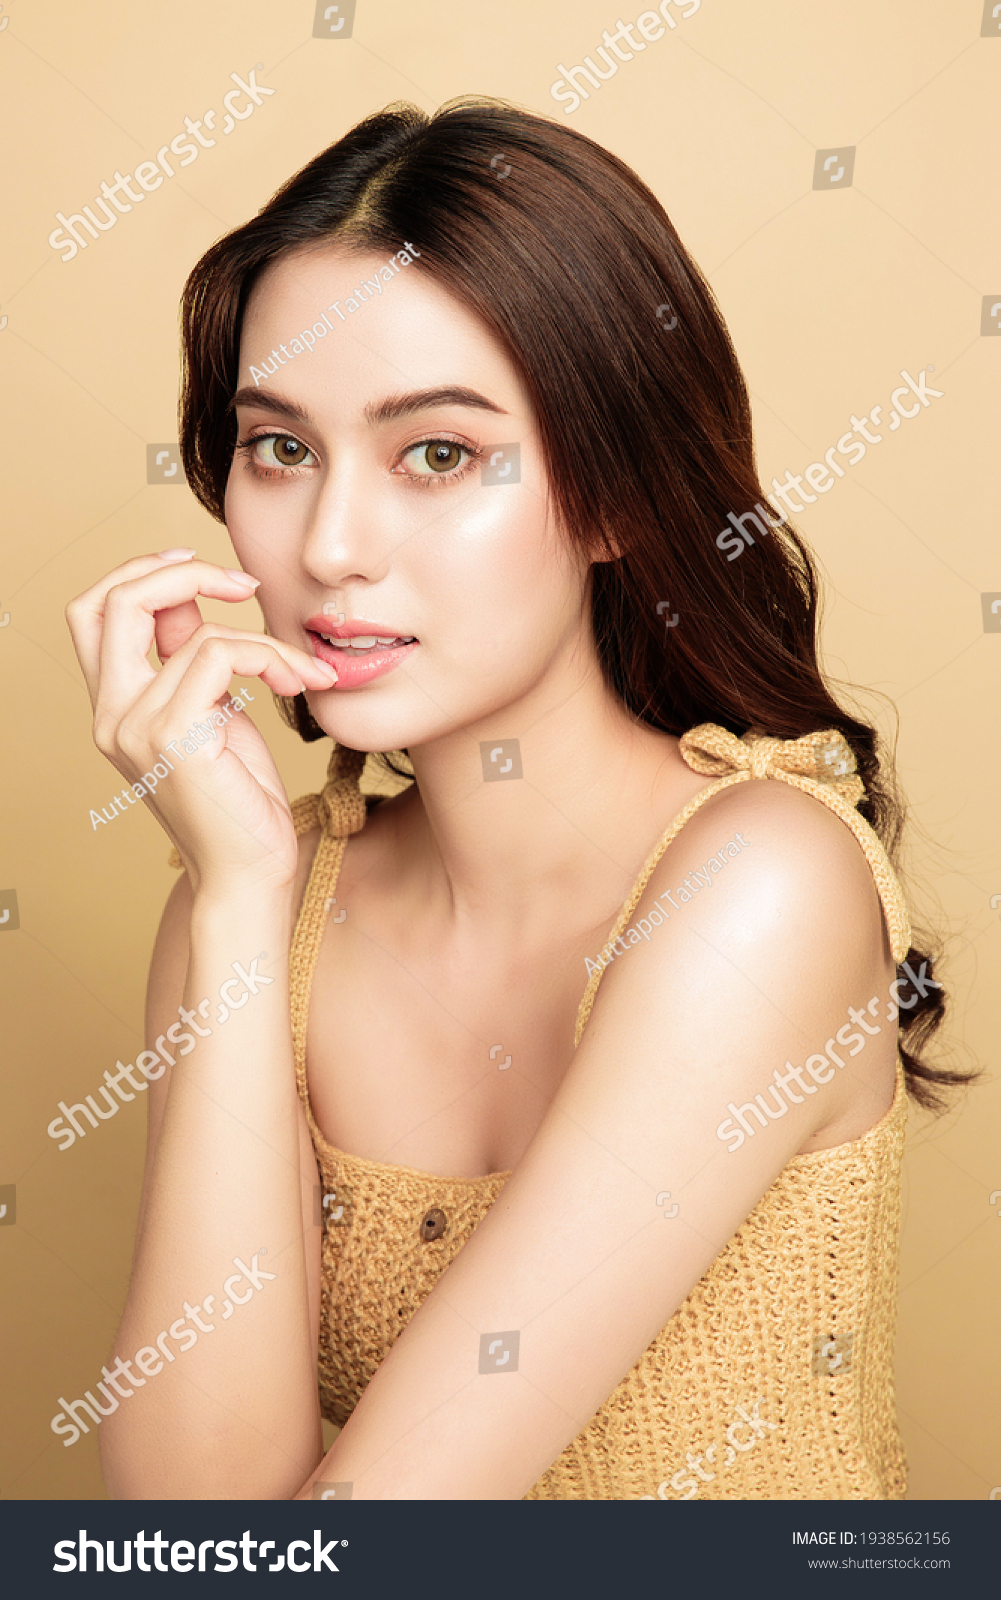 Asian woman are happy with perfect clean healthy skin and beautiful long brown hair. Cute female model clean fresh skin. Expressive facial expressions. Cosmetology concept. #1938562156